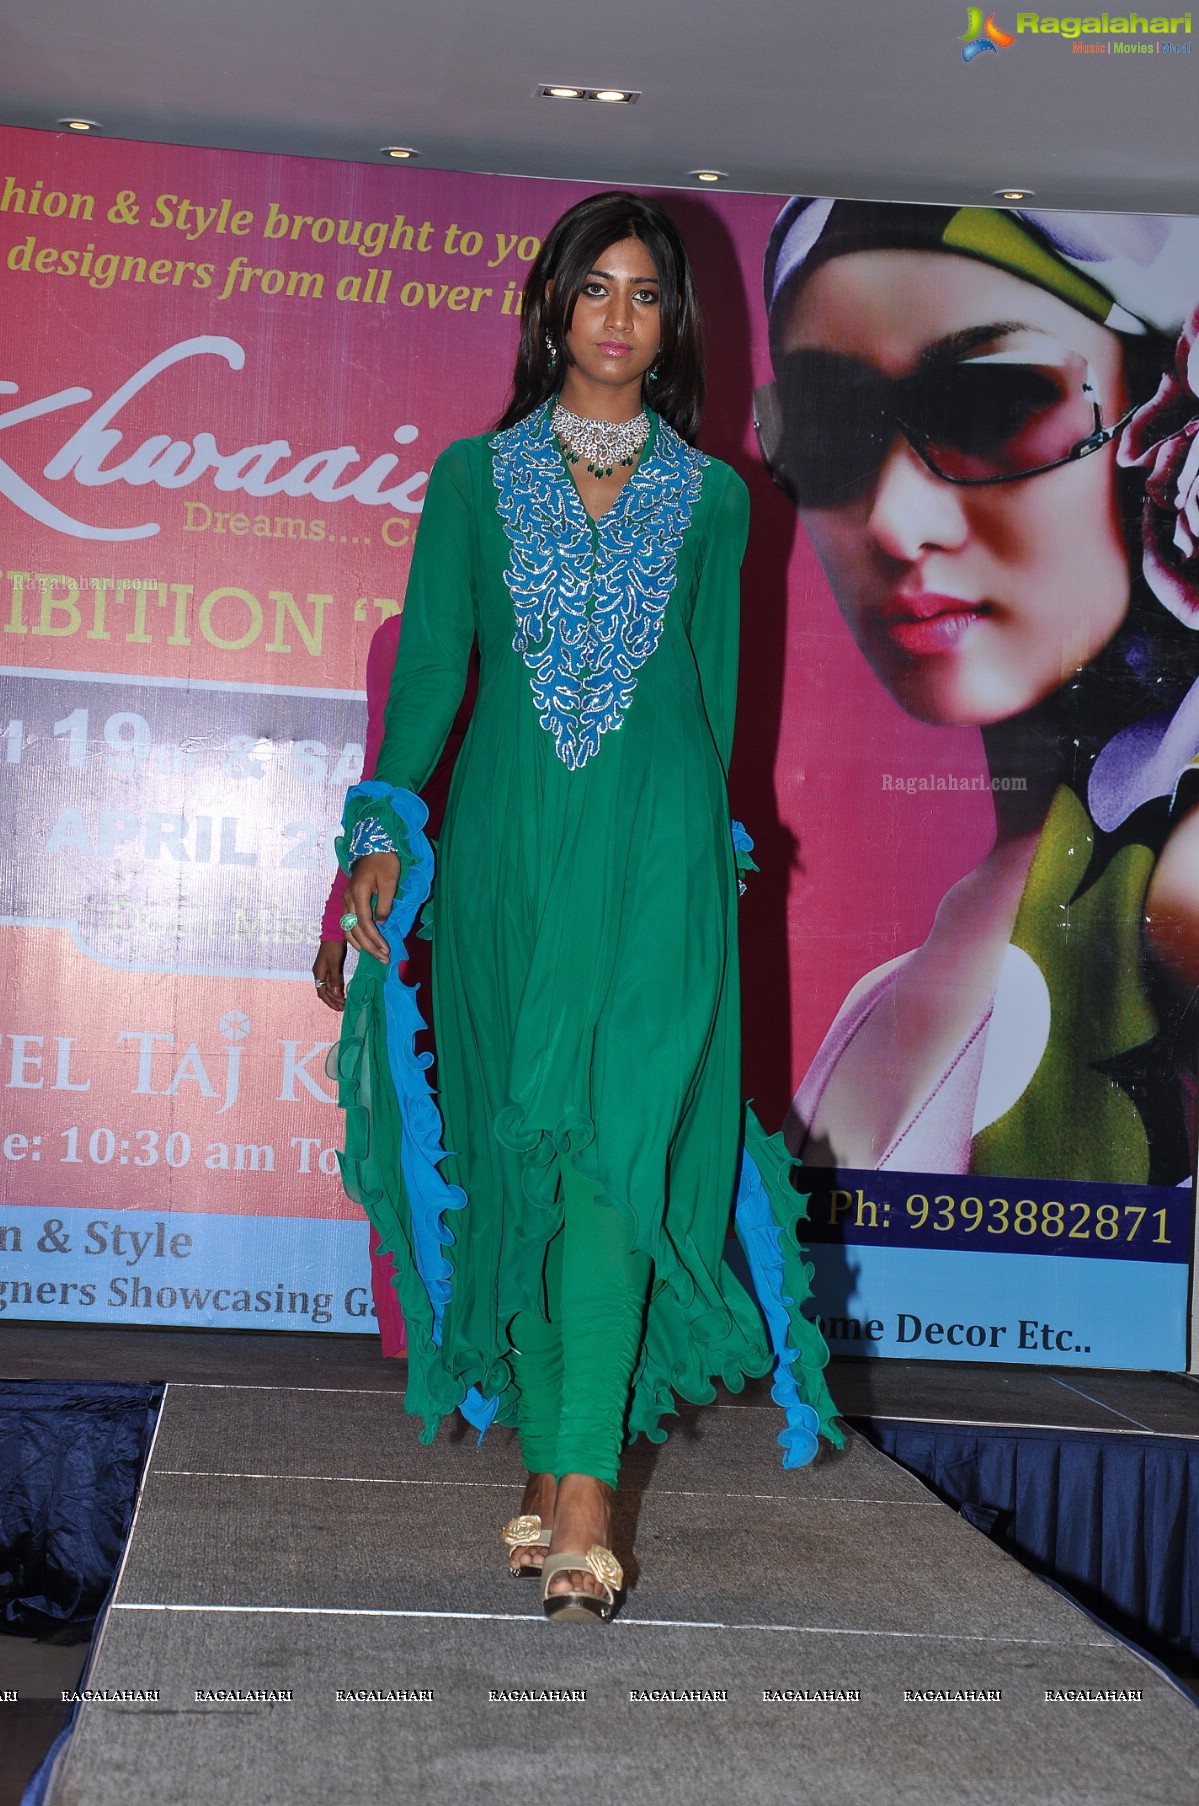 Fashion Show featuring designers collection of Khwaaish Designer Exhibition